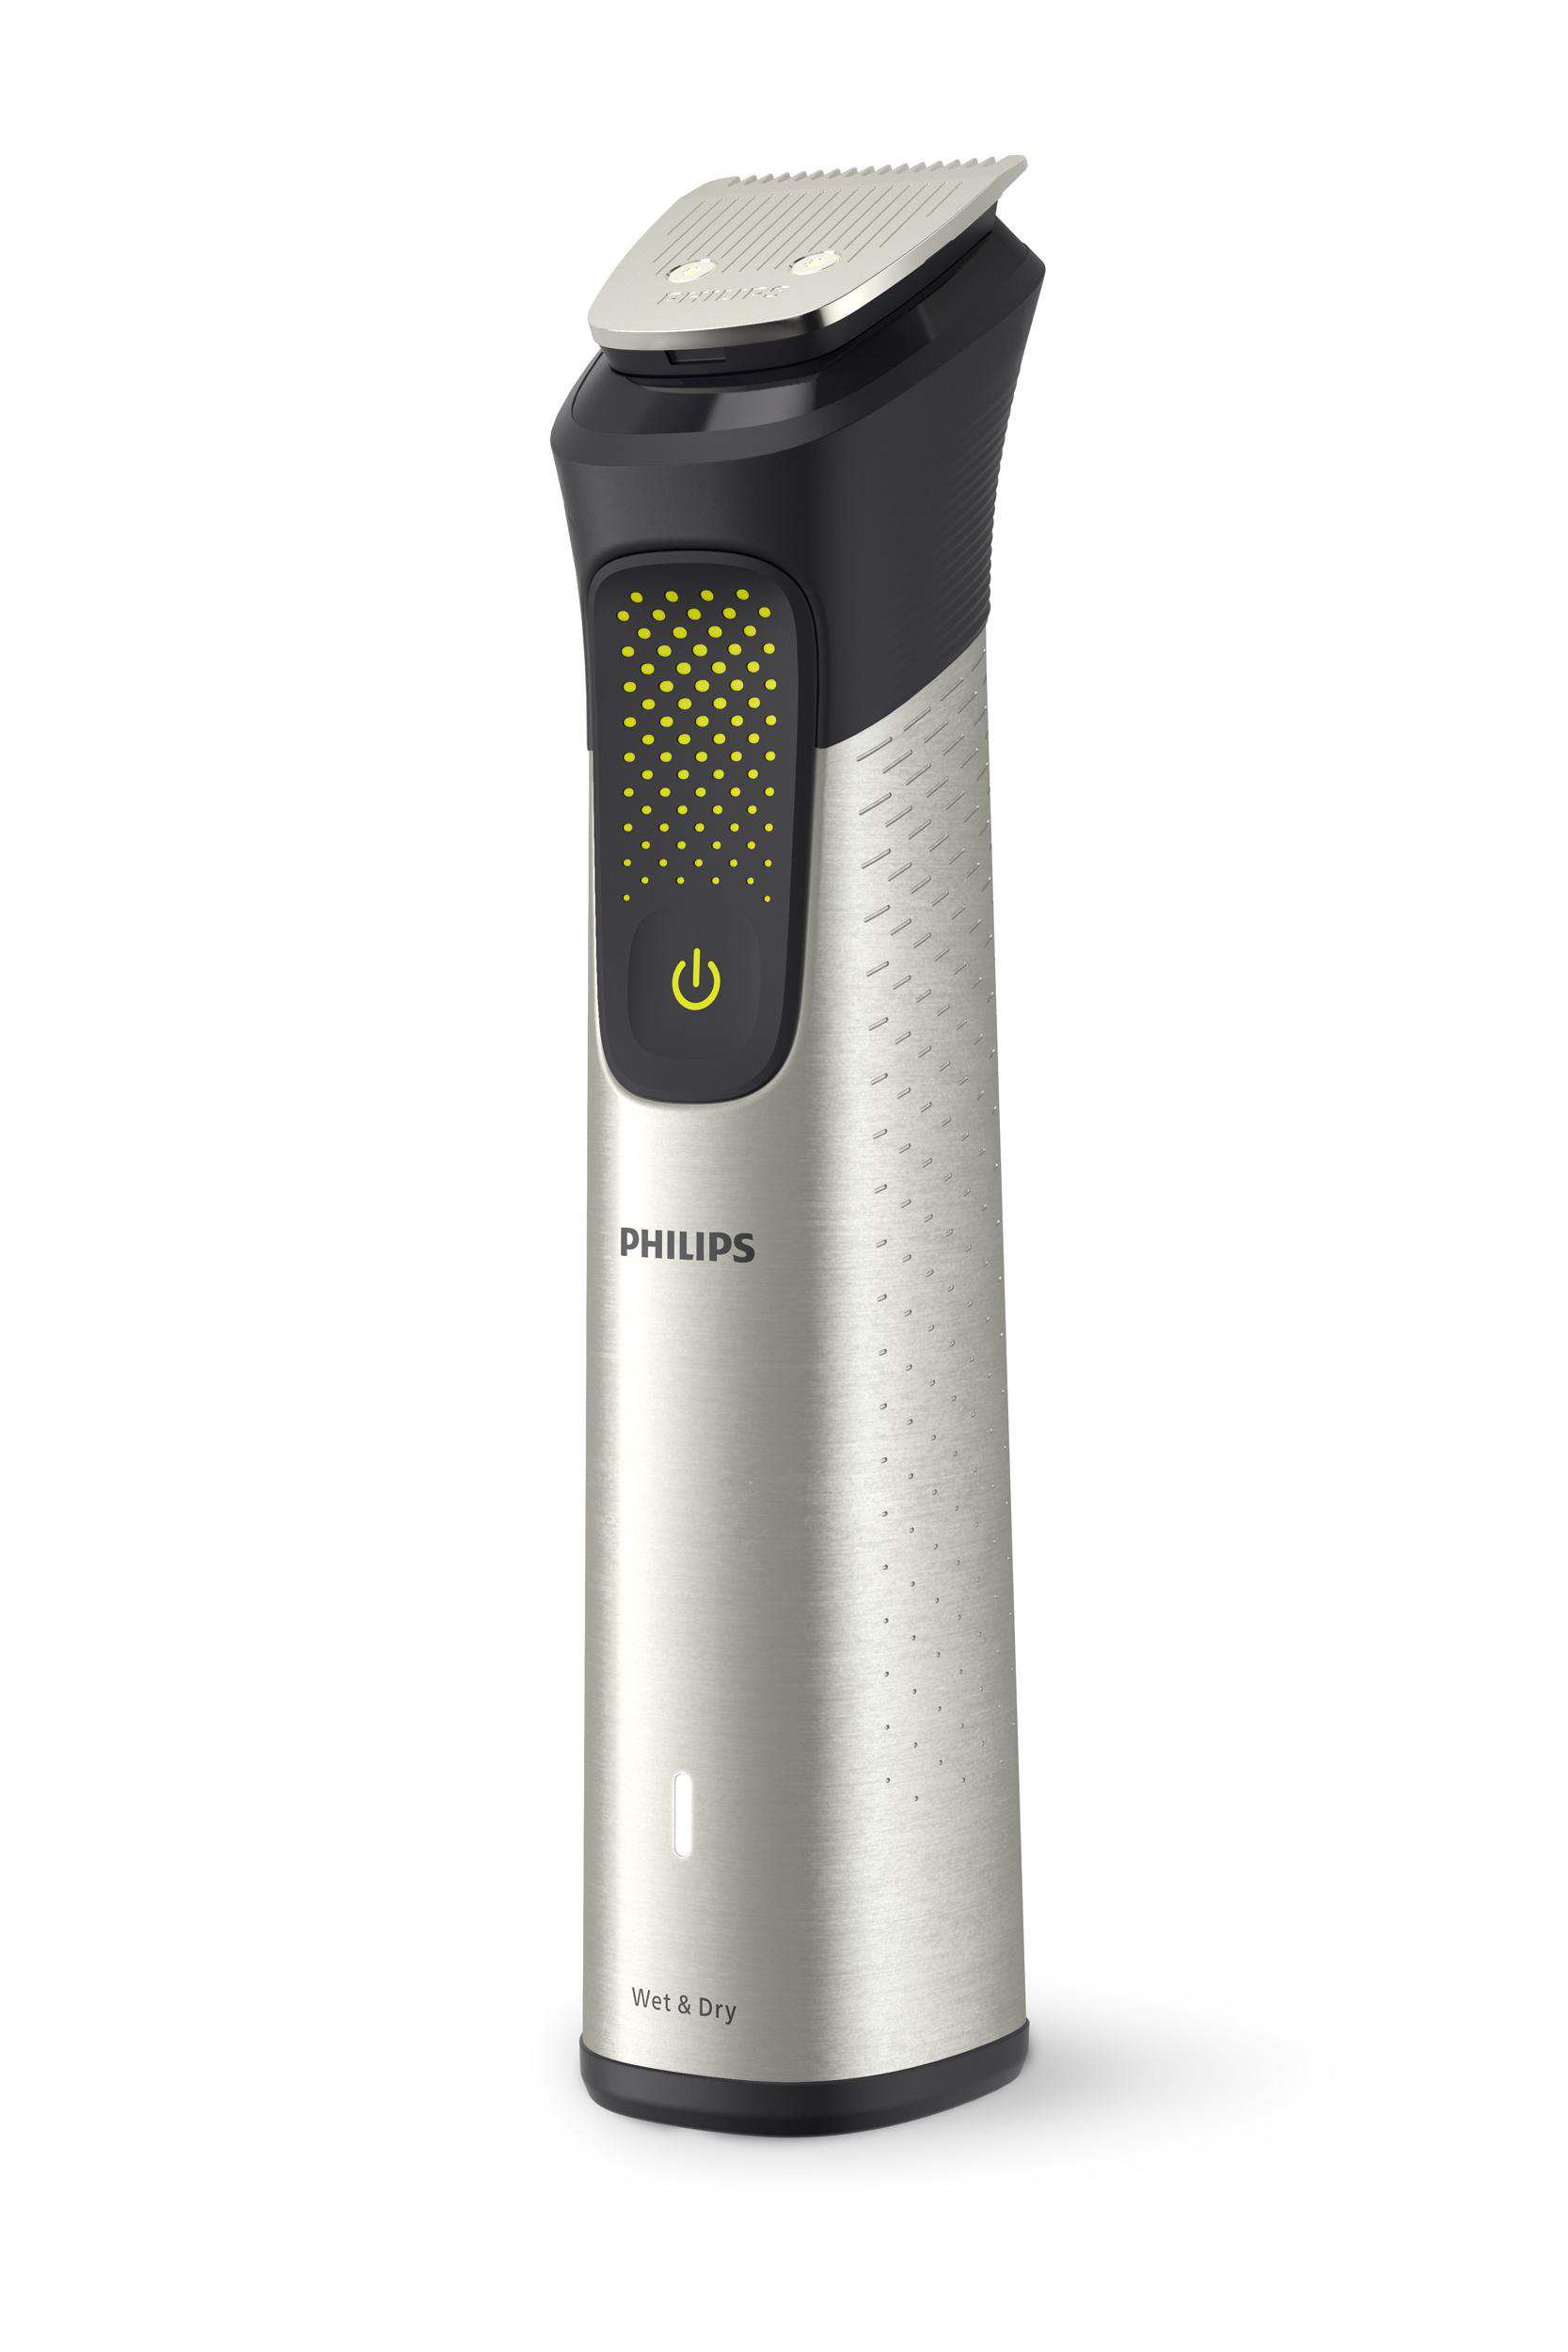 PHILIPS MG9555/15 All-in-One Serie Silber 9000 Multigroomer